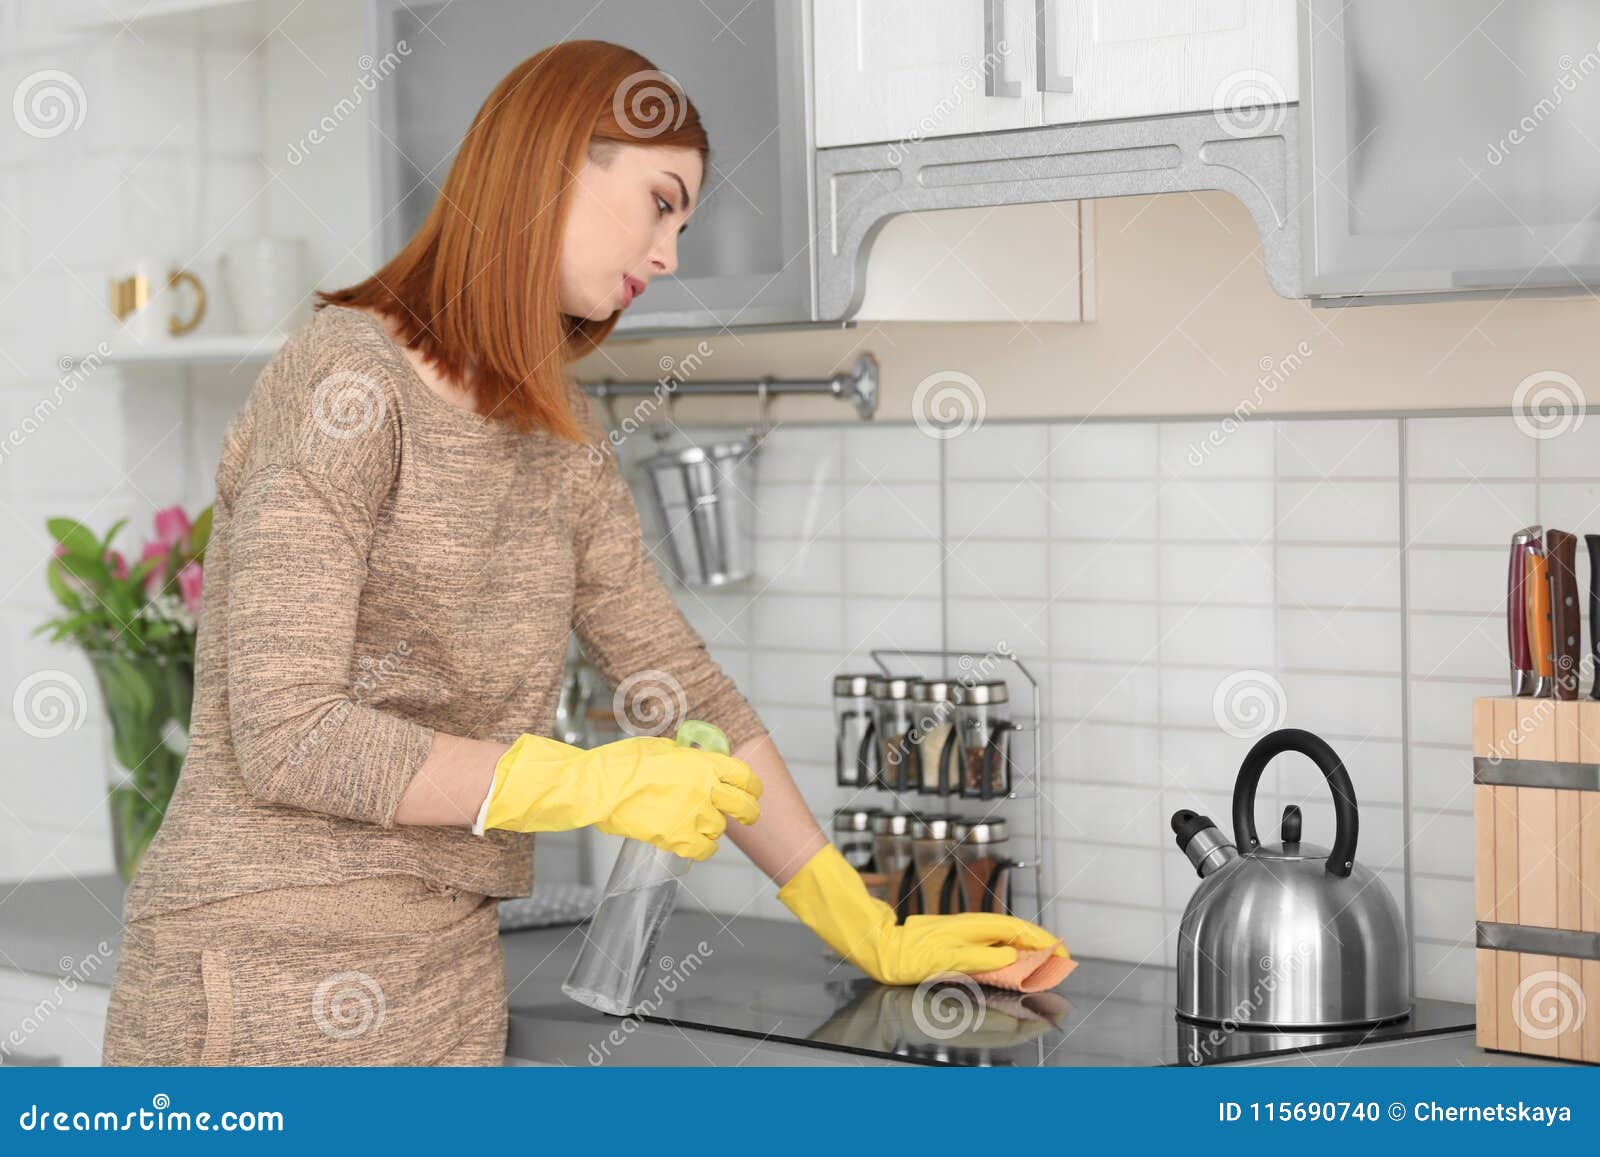 Tired Housewife Cleaning Kitchen Stock Photo Image Of Home